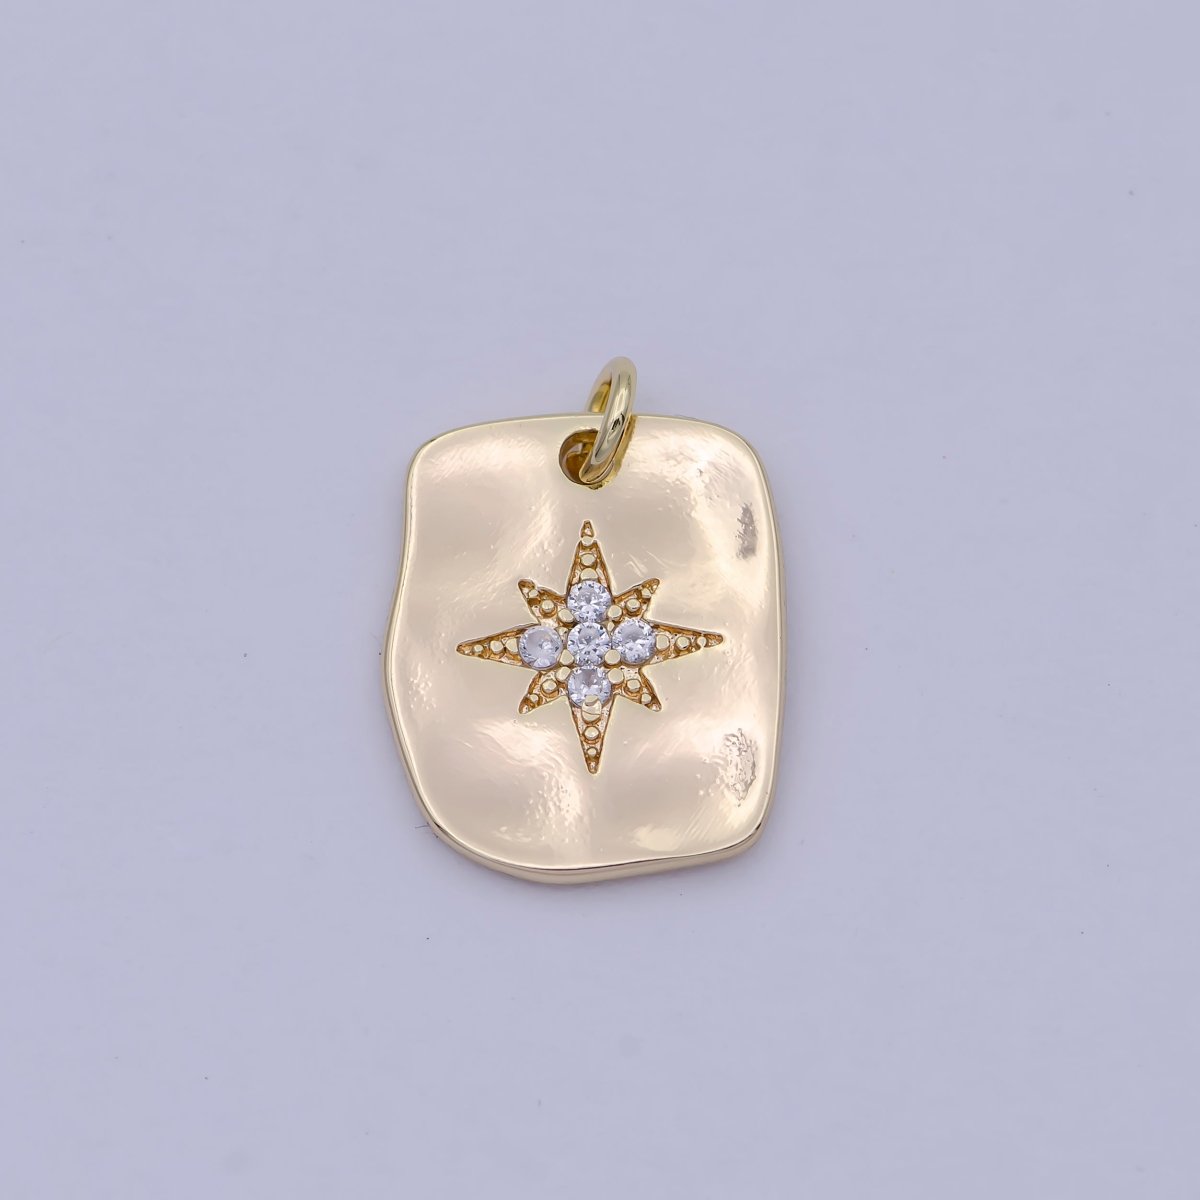 Dainty 18k gold fill Star Charm Micro Pave Star Charm in Rustic Hammered Frame Pendant for Jewelry Making Supply 15mm x 11mmC-372 - DLUXCA